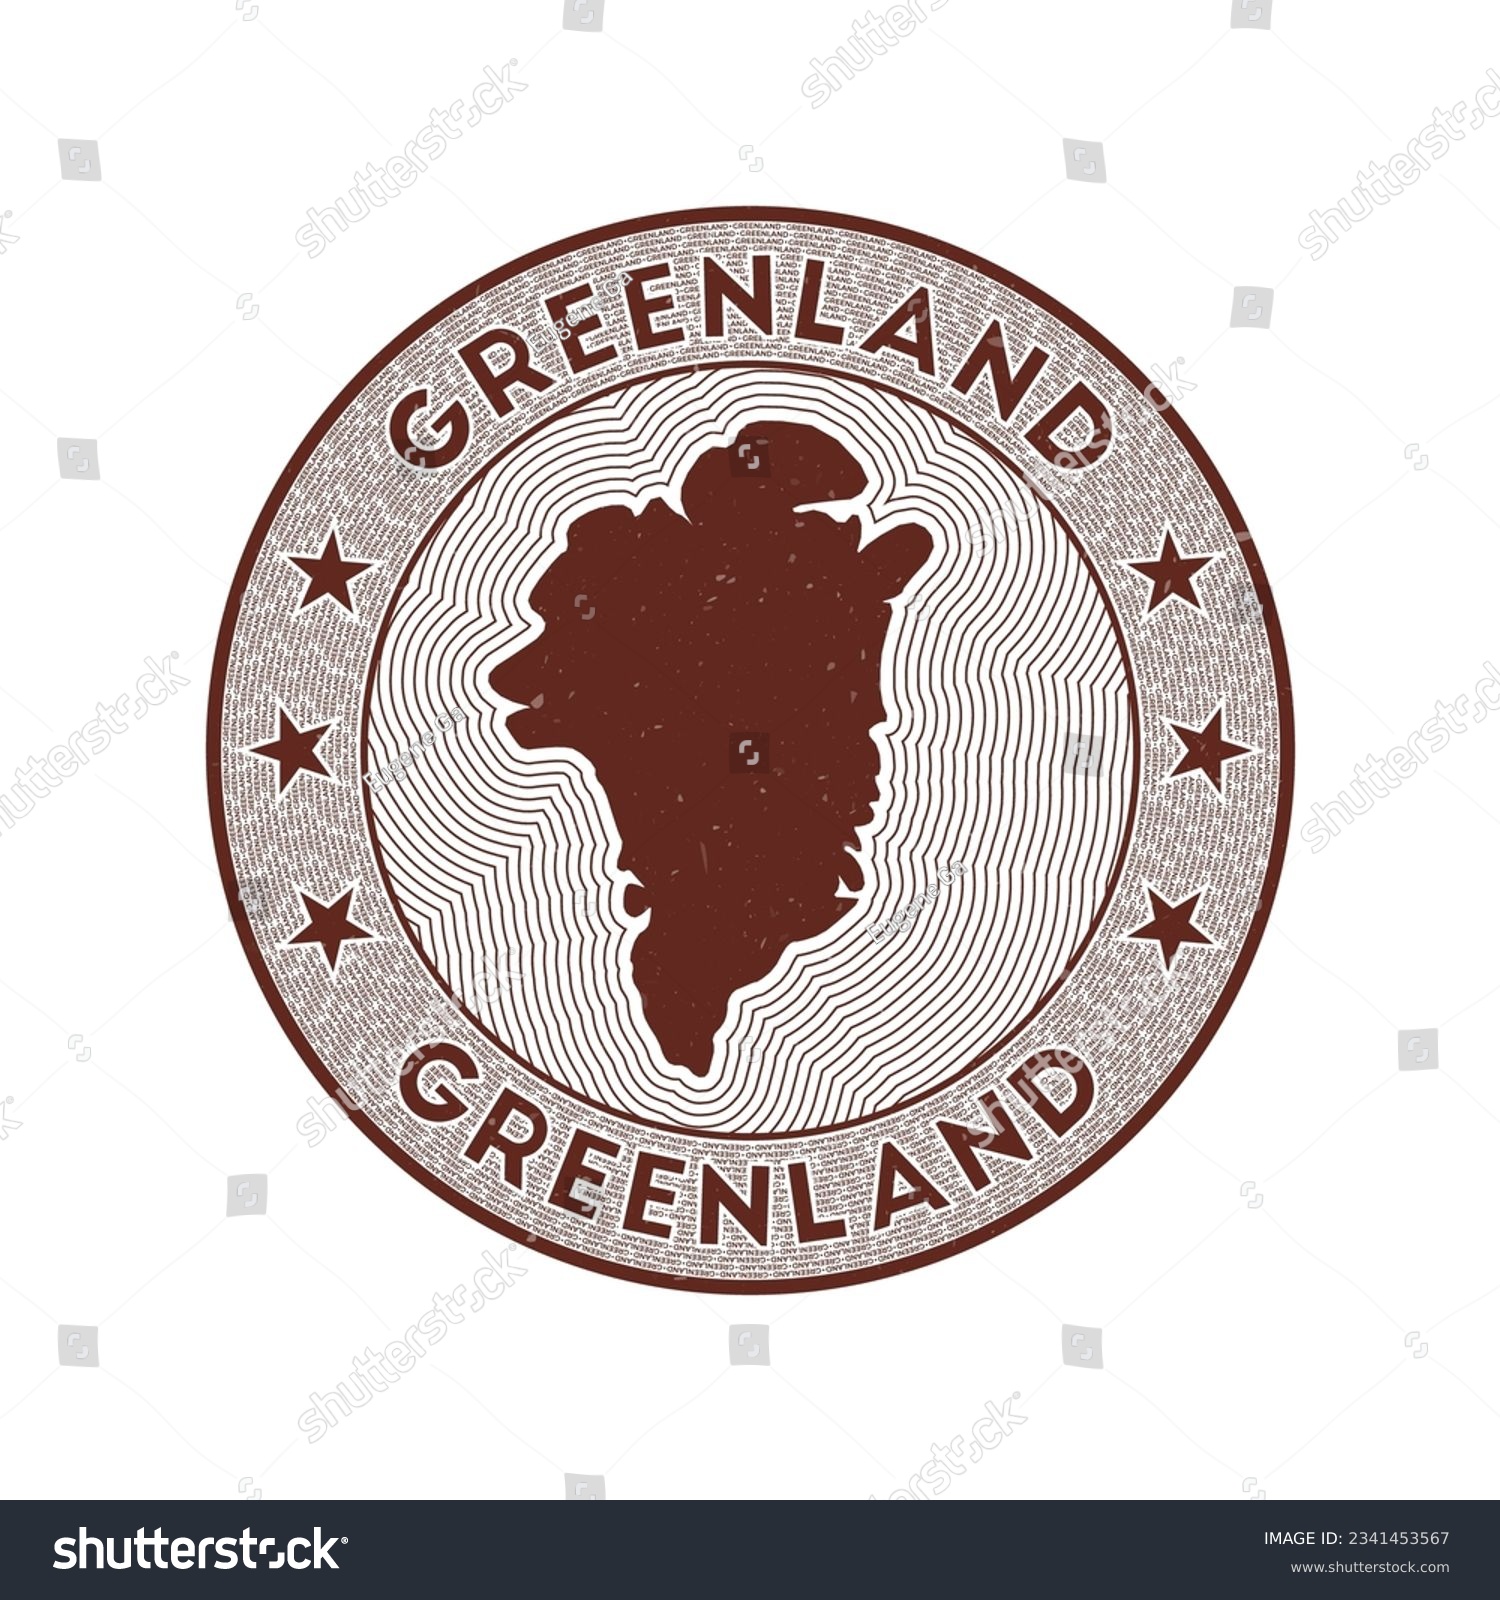 Greenland round badge vector. Country round stamp with shape of Greenland, isolines and circular country name. Authentic emblem. Appealing vector illustration. #2341453567